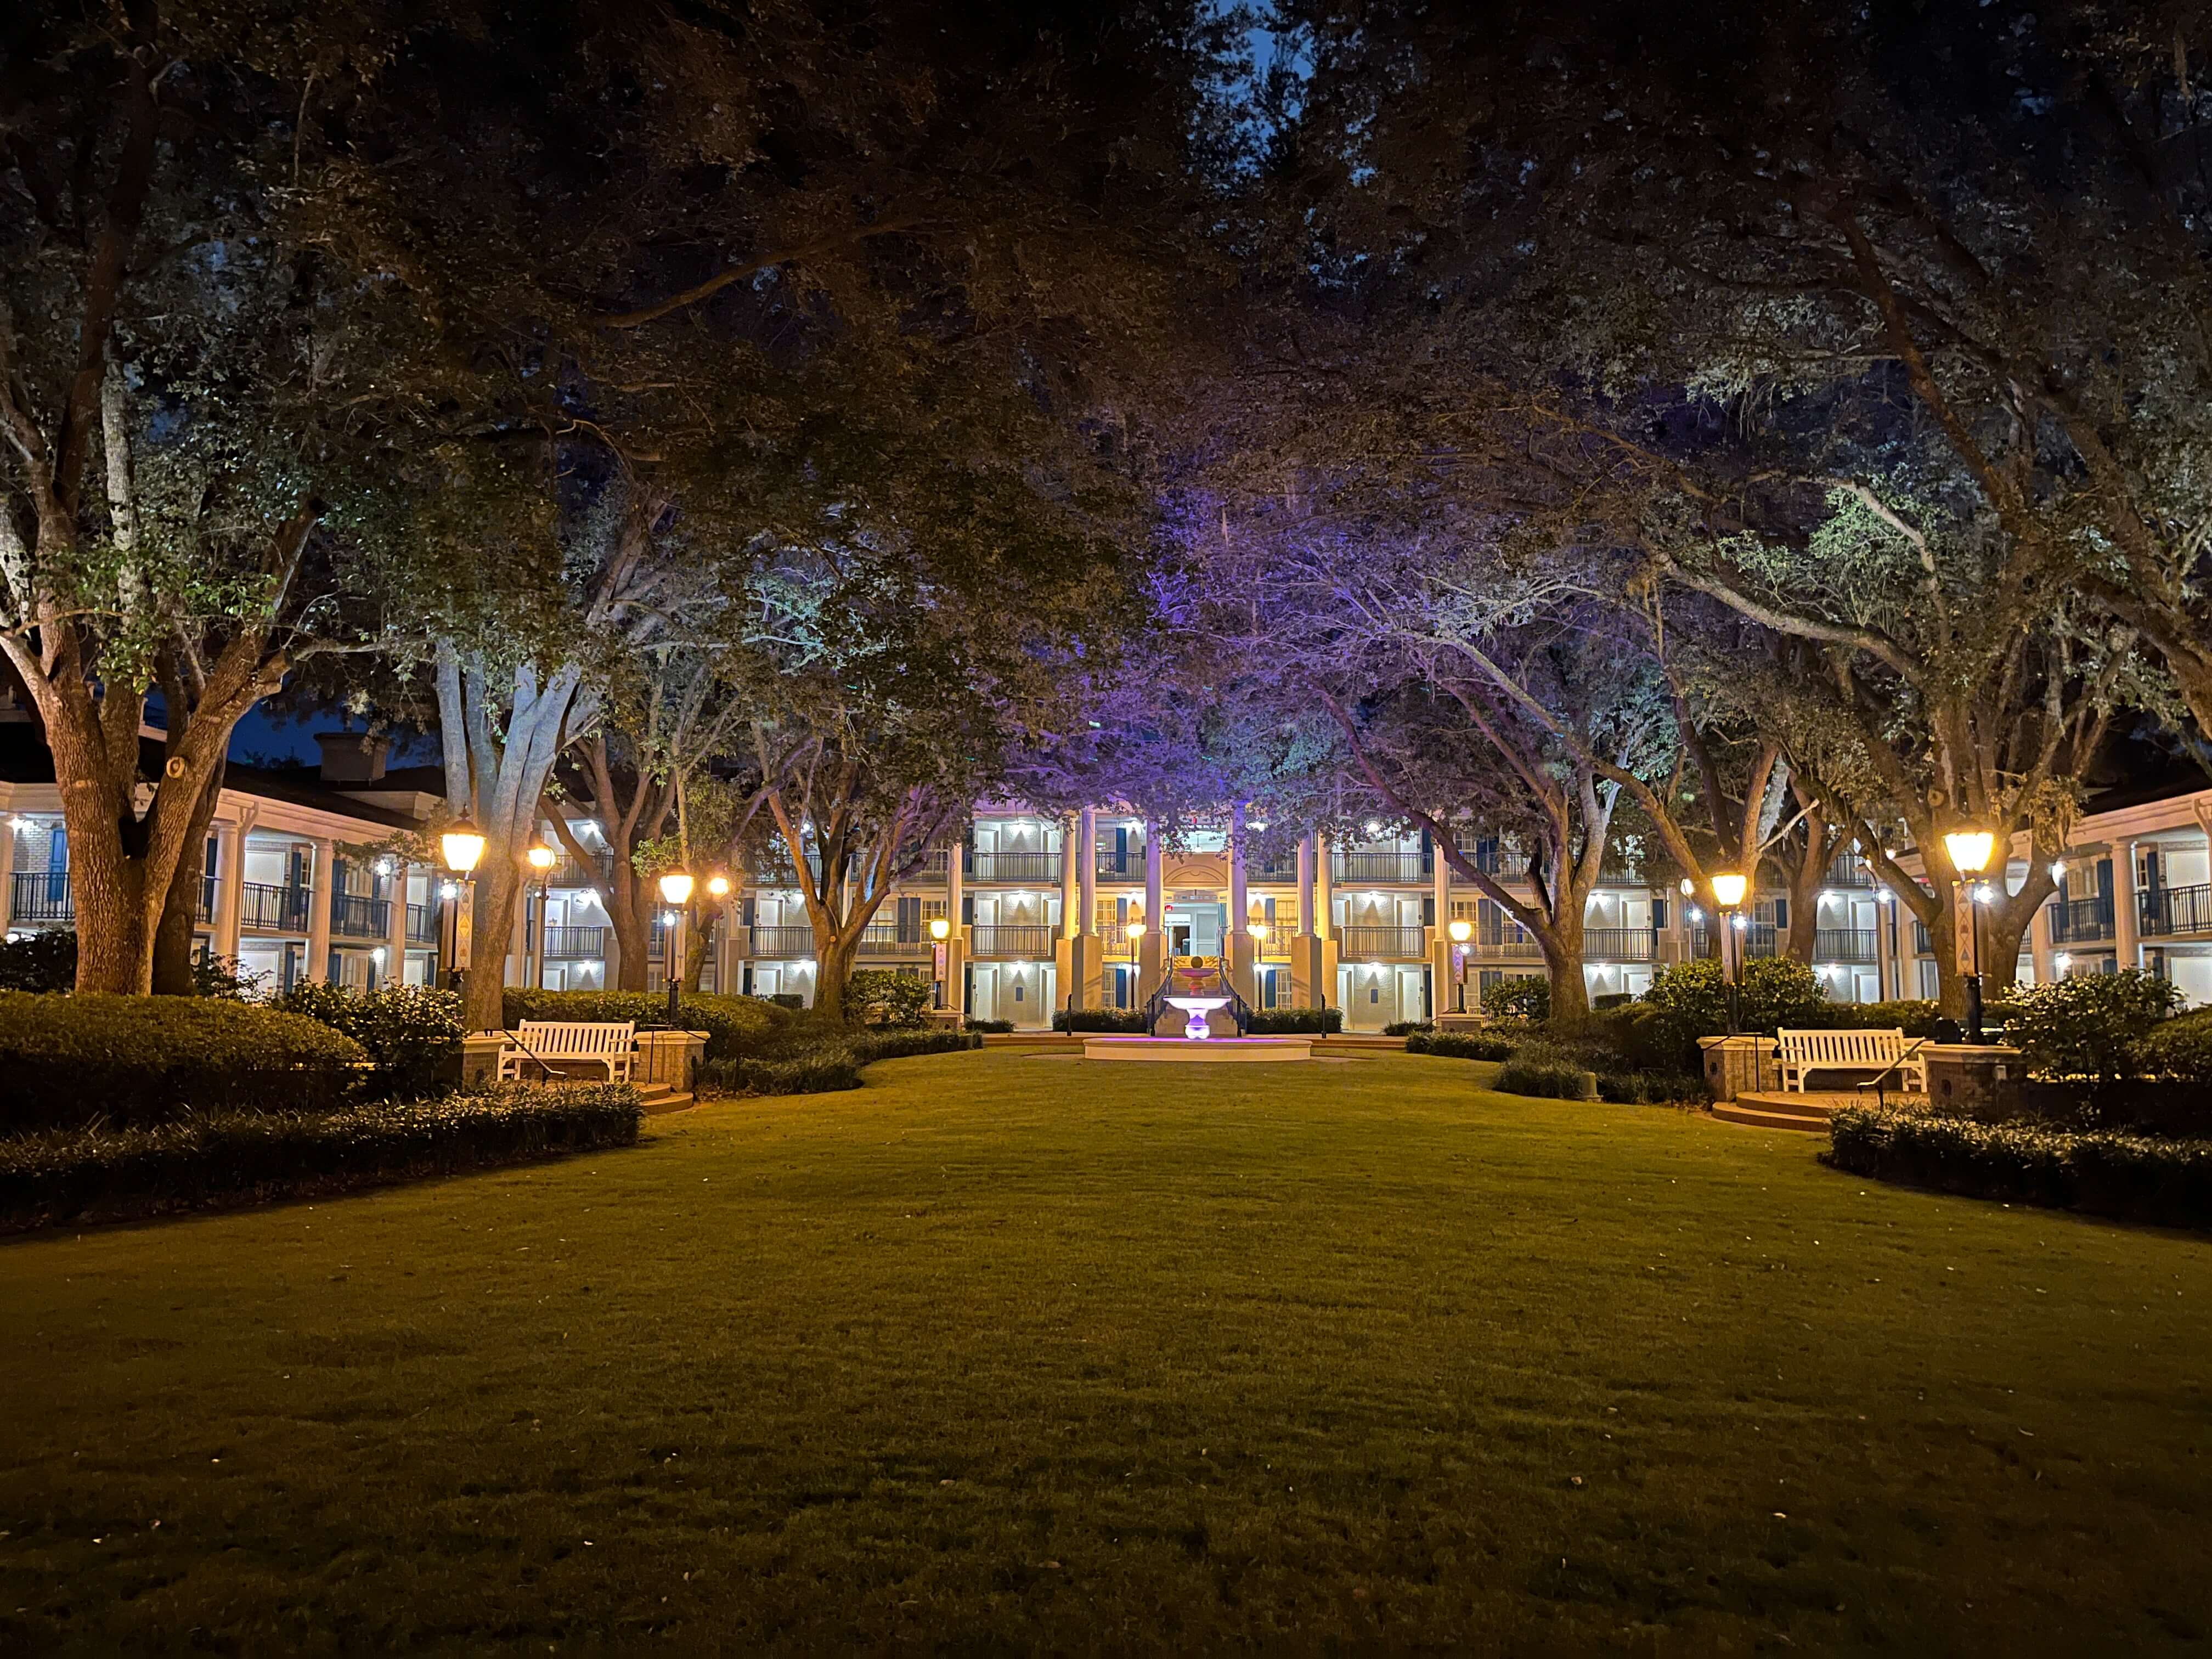 lights atop lamp posts illuminate a building in Magnolia Bend at Port Orleans Riverside